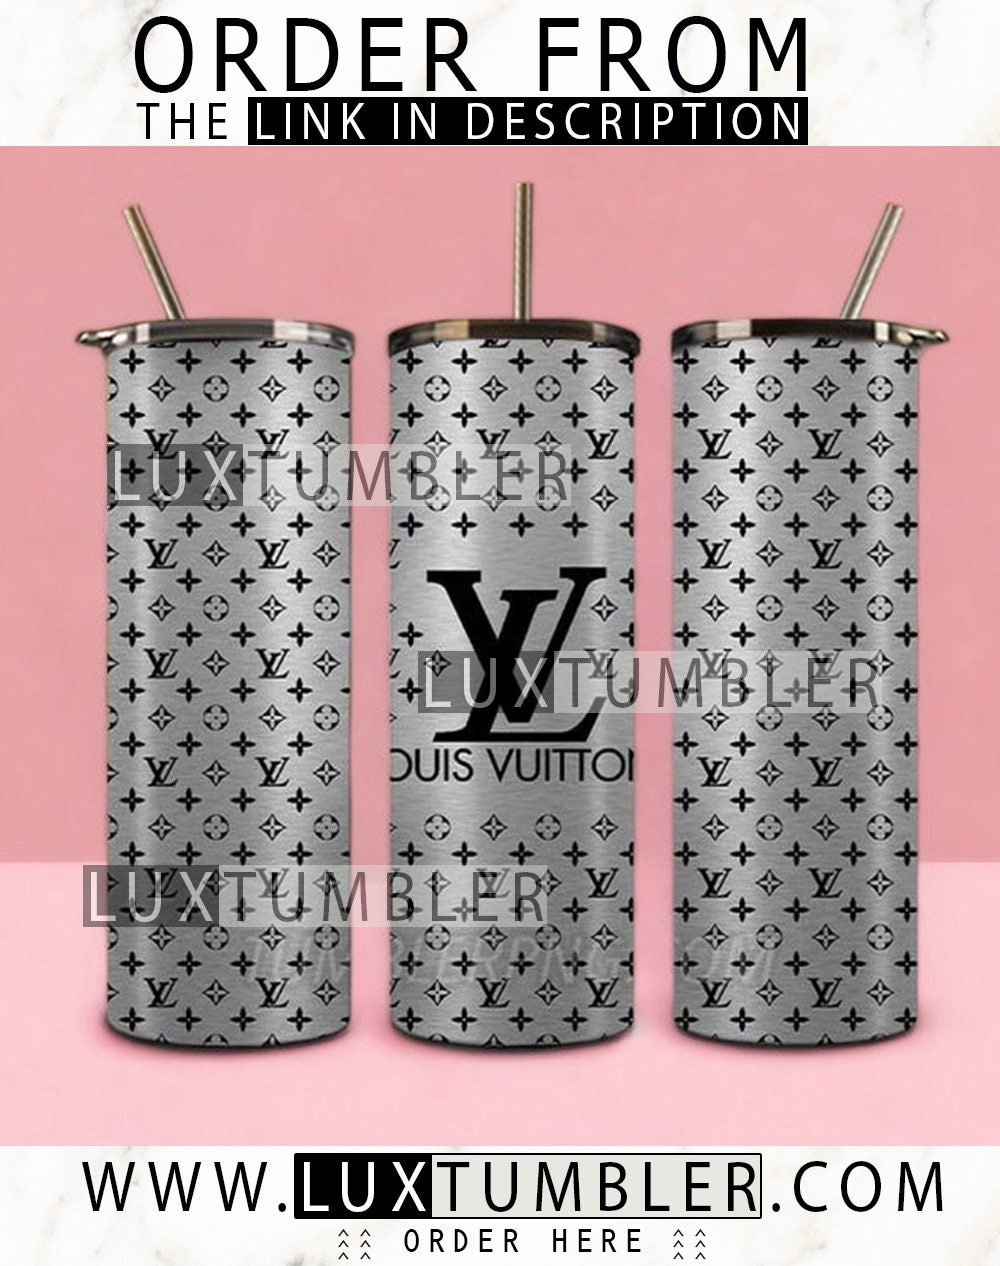 louis vuitton tumbler with handle